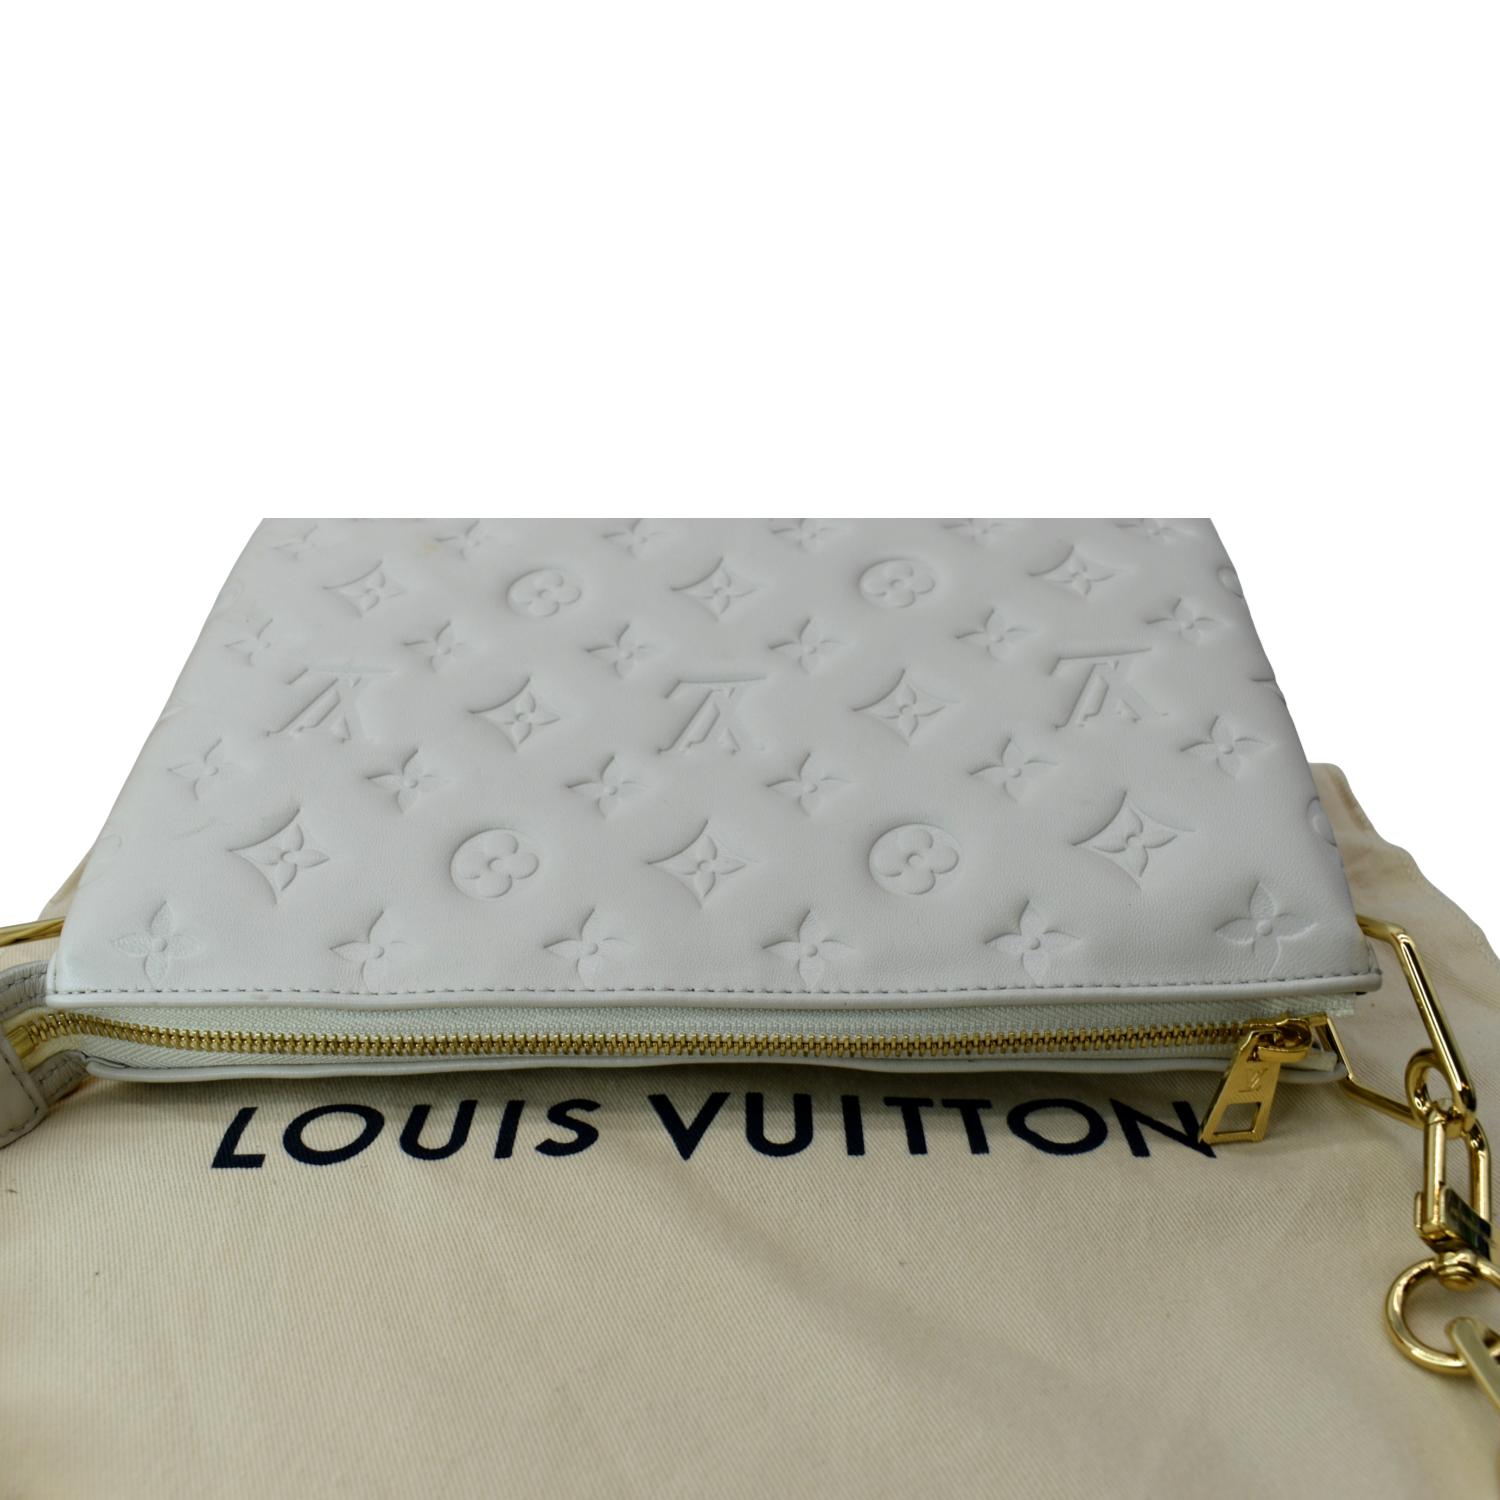 Louis Vuitton Coussin PM Handbag Colorful Monogram Embossed Puffed She -  Praise To Heaven